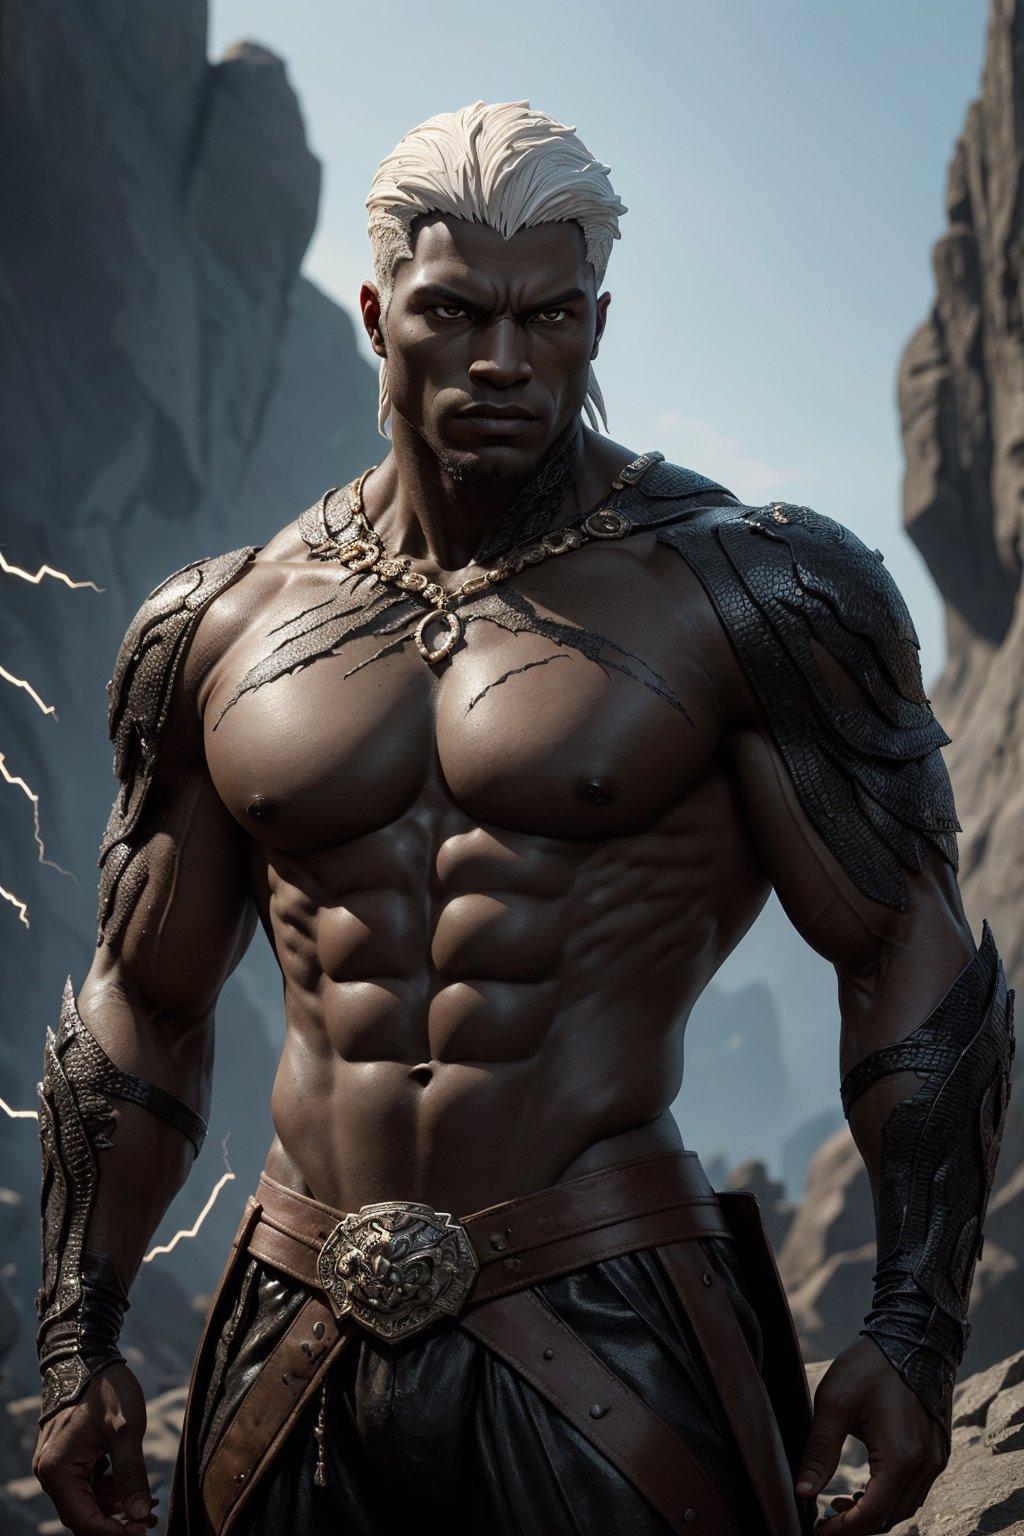 ((masterpiece, best quality)), A remarkable masterpiece showcases a magnificent black humanoid sculpted from solid rock, his upper body bare and muscular. His skin, etched with intricate cracks, emits white electricity that weaves through the fissures. With dragonborn qualities, this stunning male figure possesses striking white hair, set against a highly detailed outdoor background.